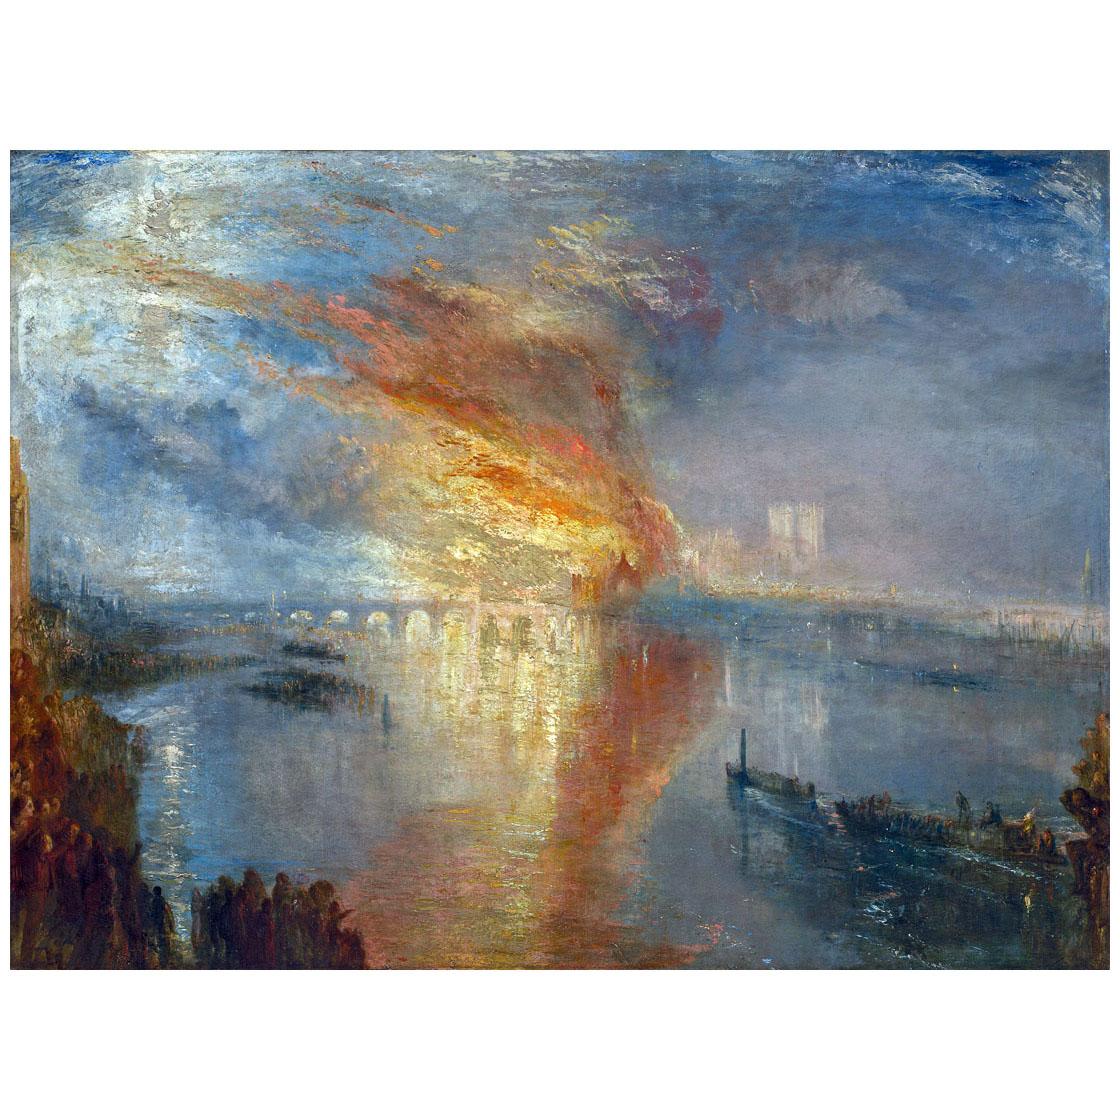 William Turner. Burning of the Houses of Parliament. 1834. Cleveland Museum of Art